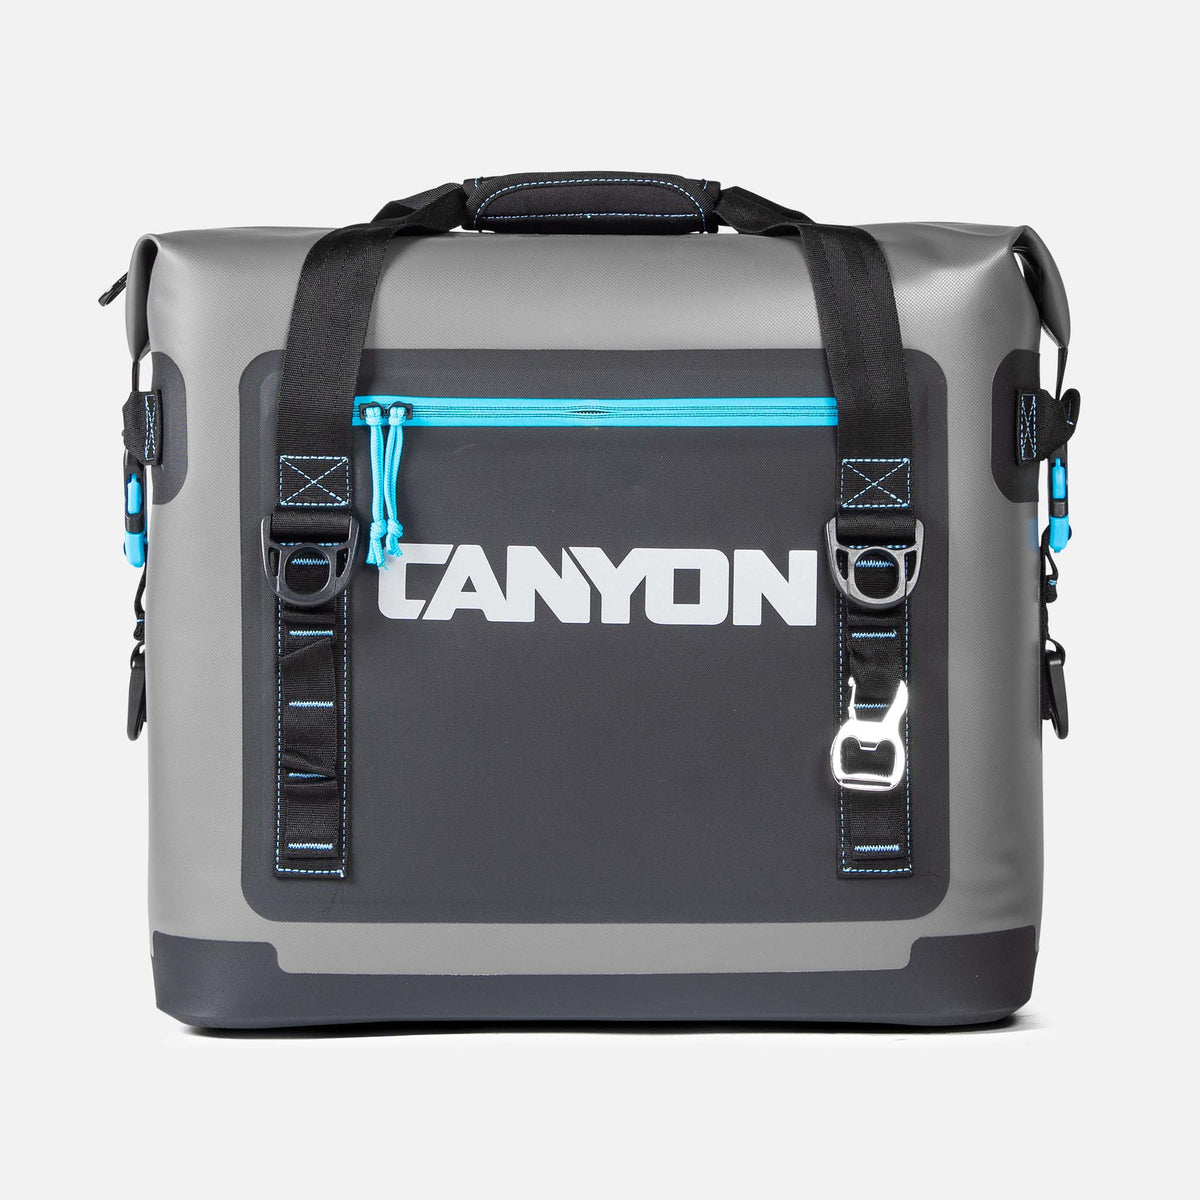 Nomad 20 - Canyon Coolers